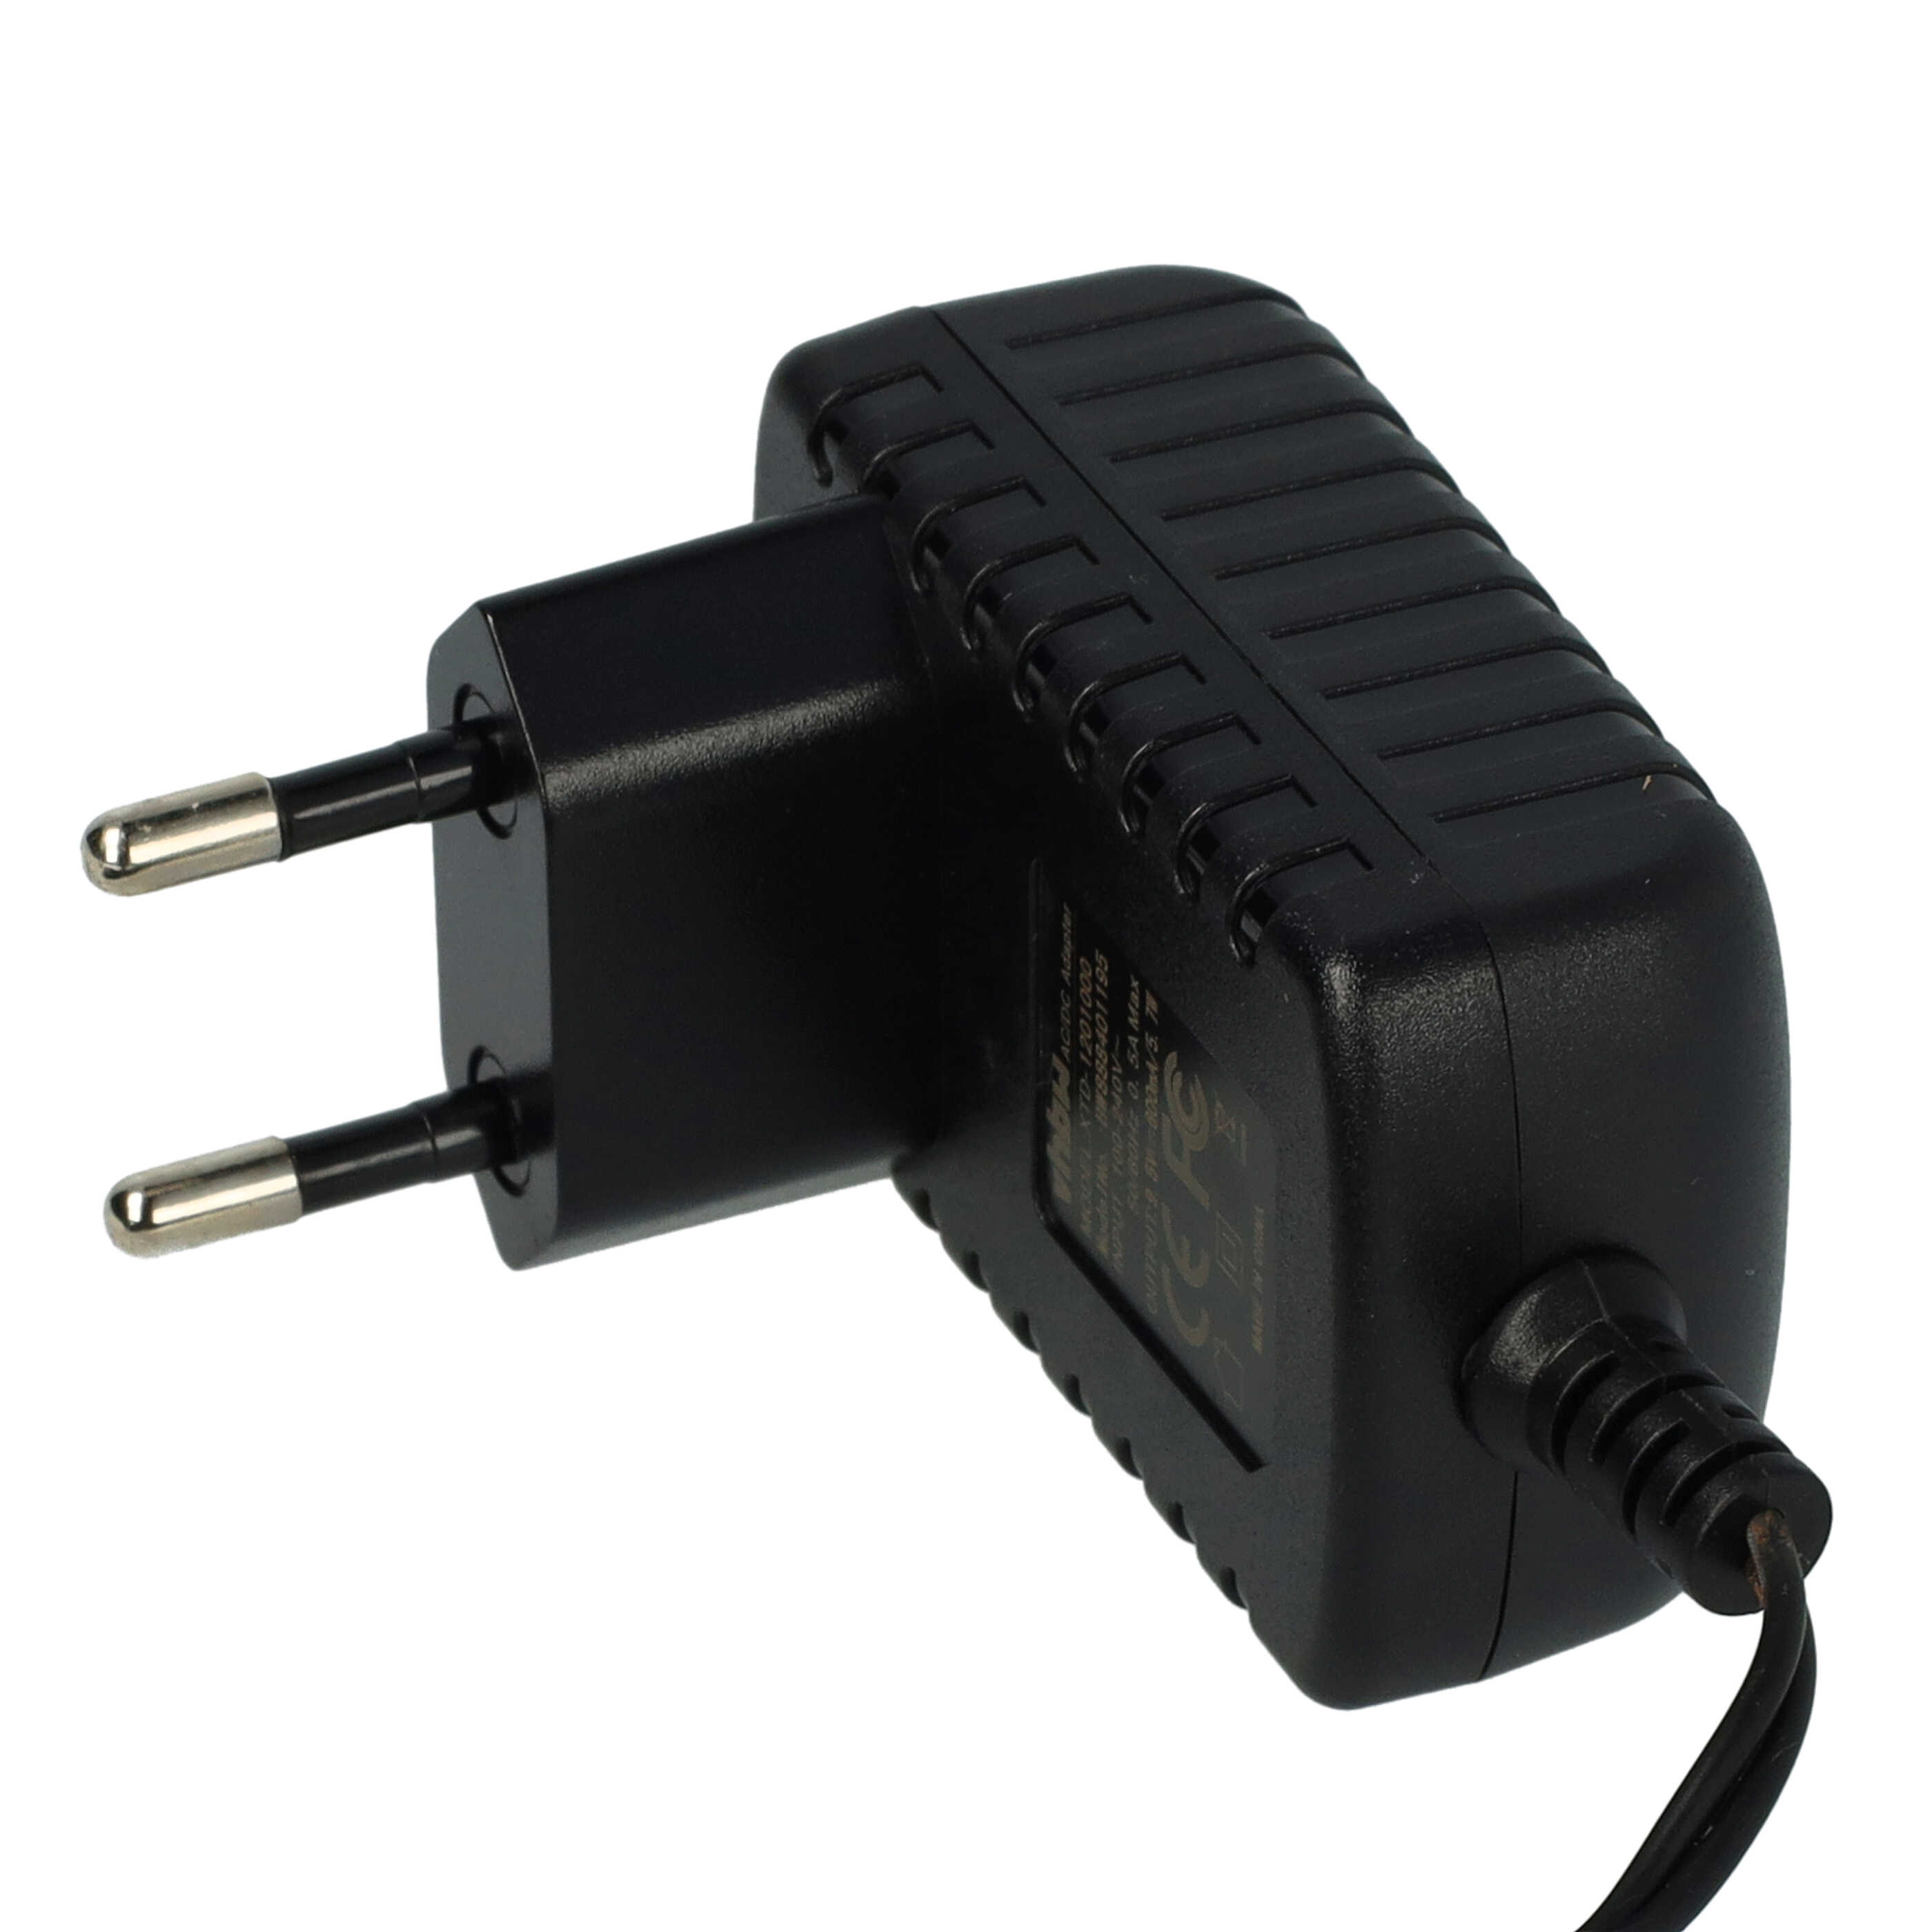 Mains Adapter / Charger replaces Kärcher 4054278294698 for Kärcher Cleaner, Cleaning Device - 6.1 cm